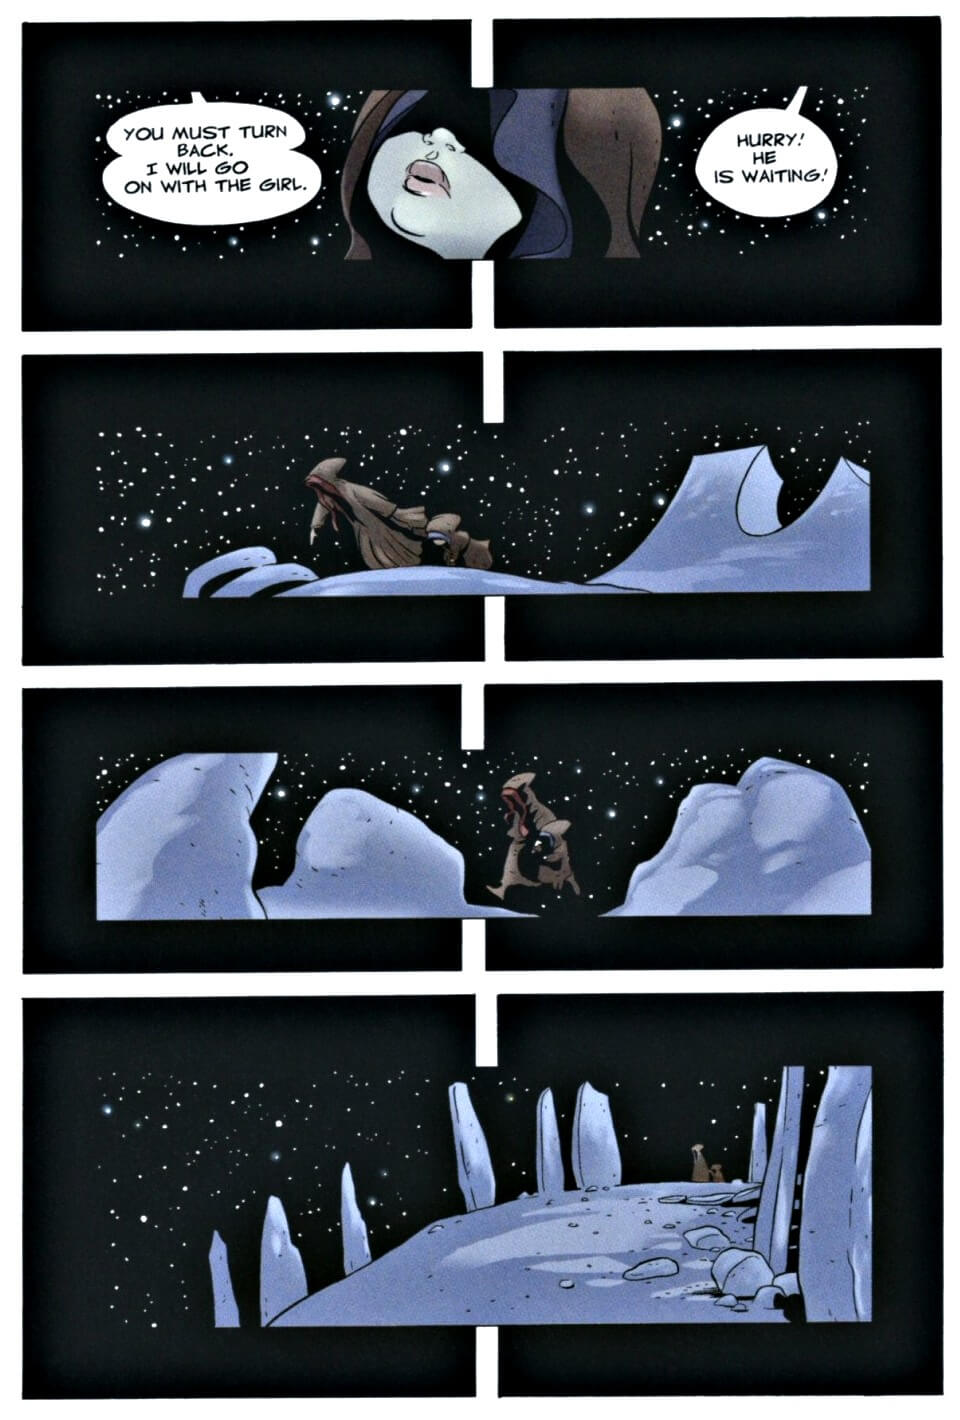 page 7 chapter 1 of bone 9 crown of horns graphic novel